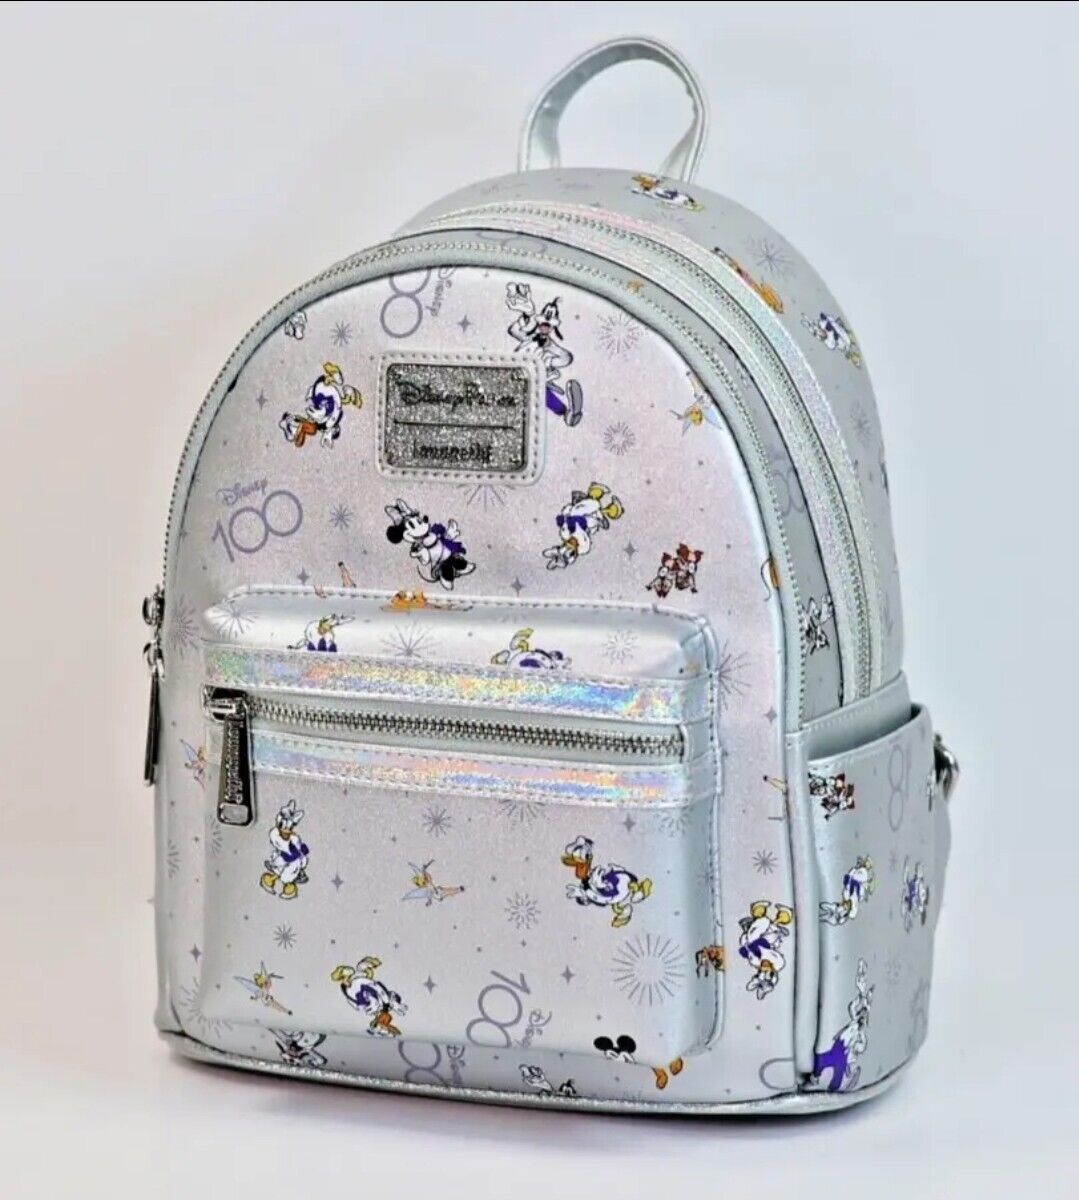 100th Anniversary Disney Backpack 2023 Mickey Friends Mini Backpack by Loungefly